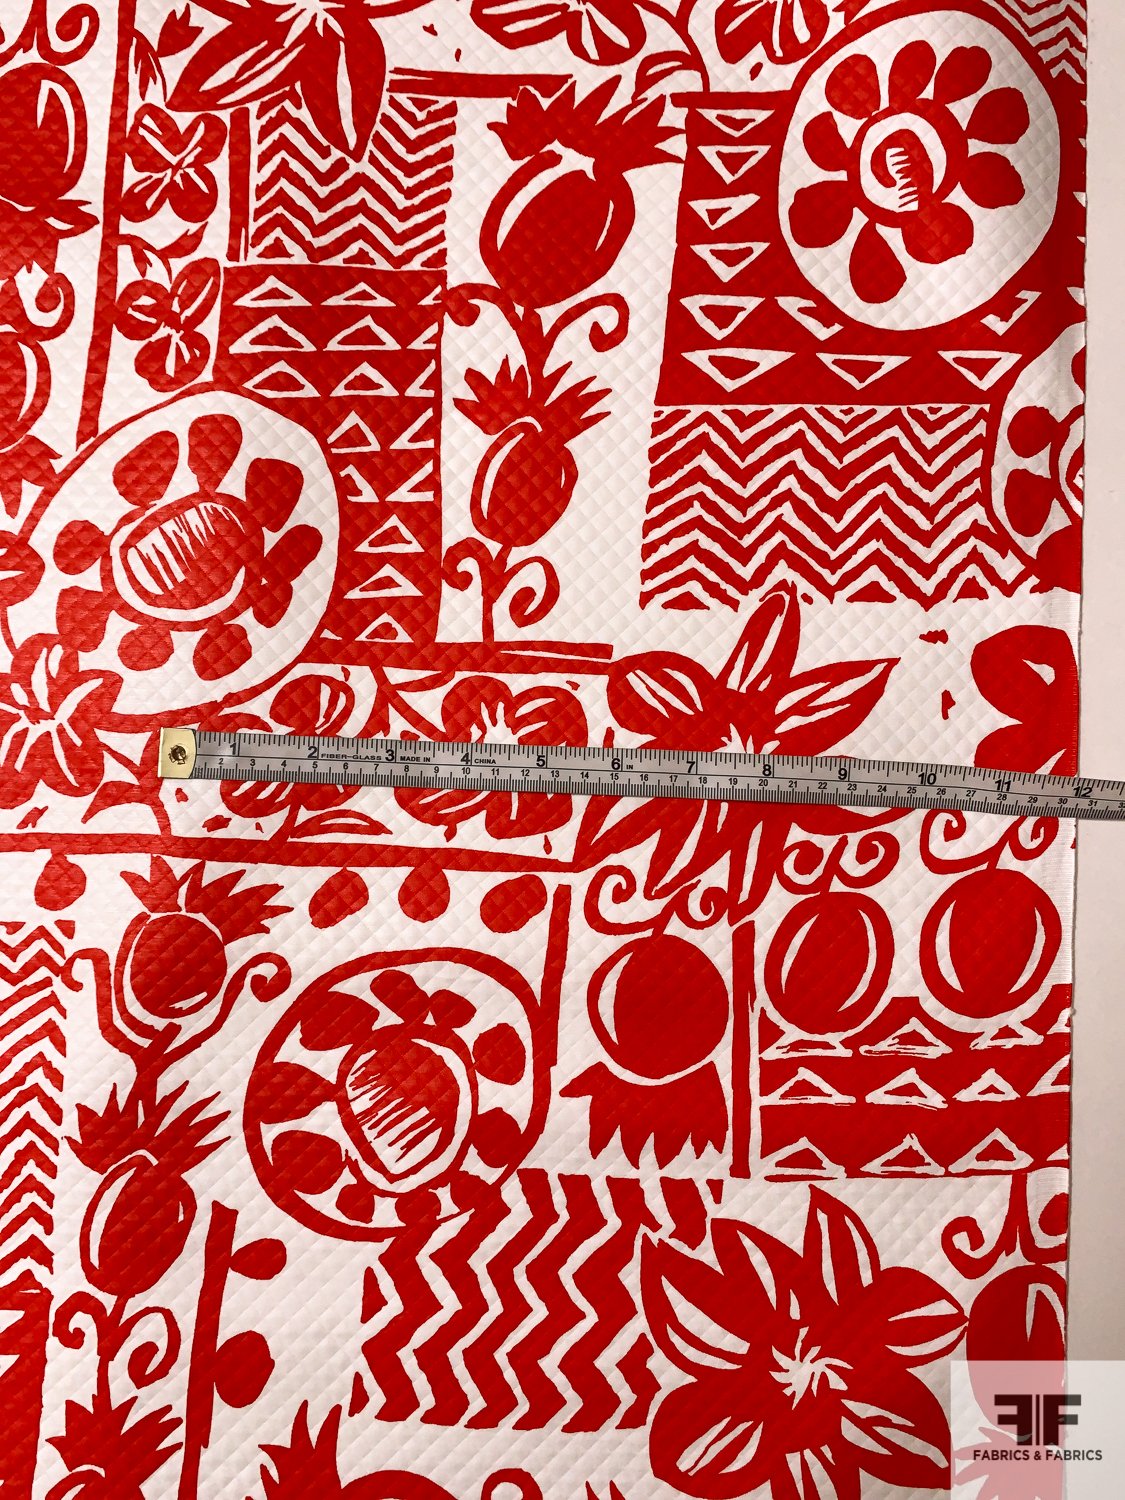 Made in France Bucol Abstract Printed Cotton Sateen Pique - Red / White